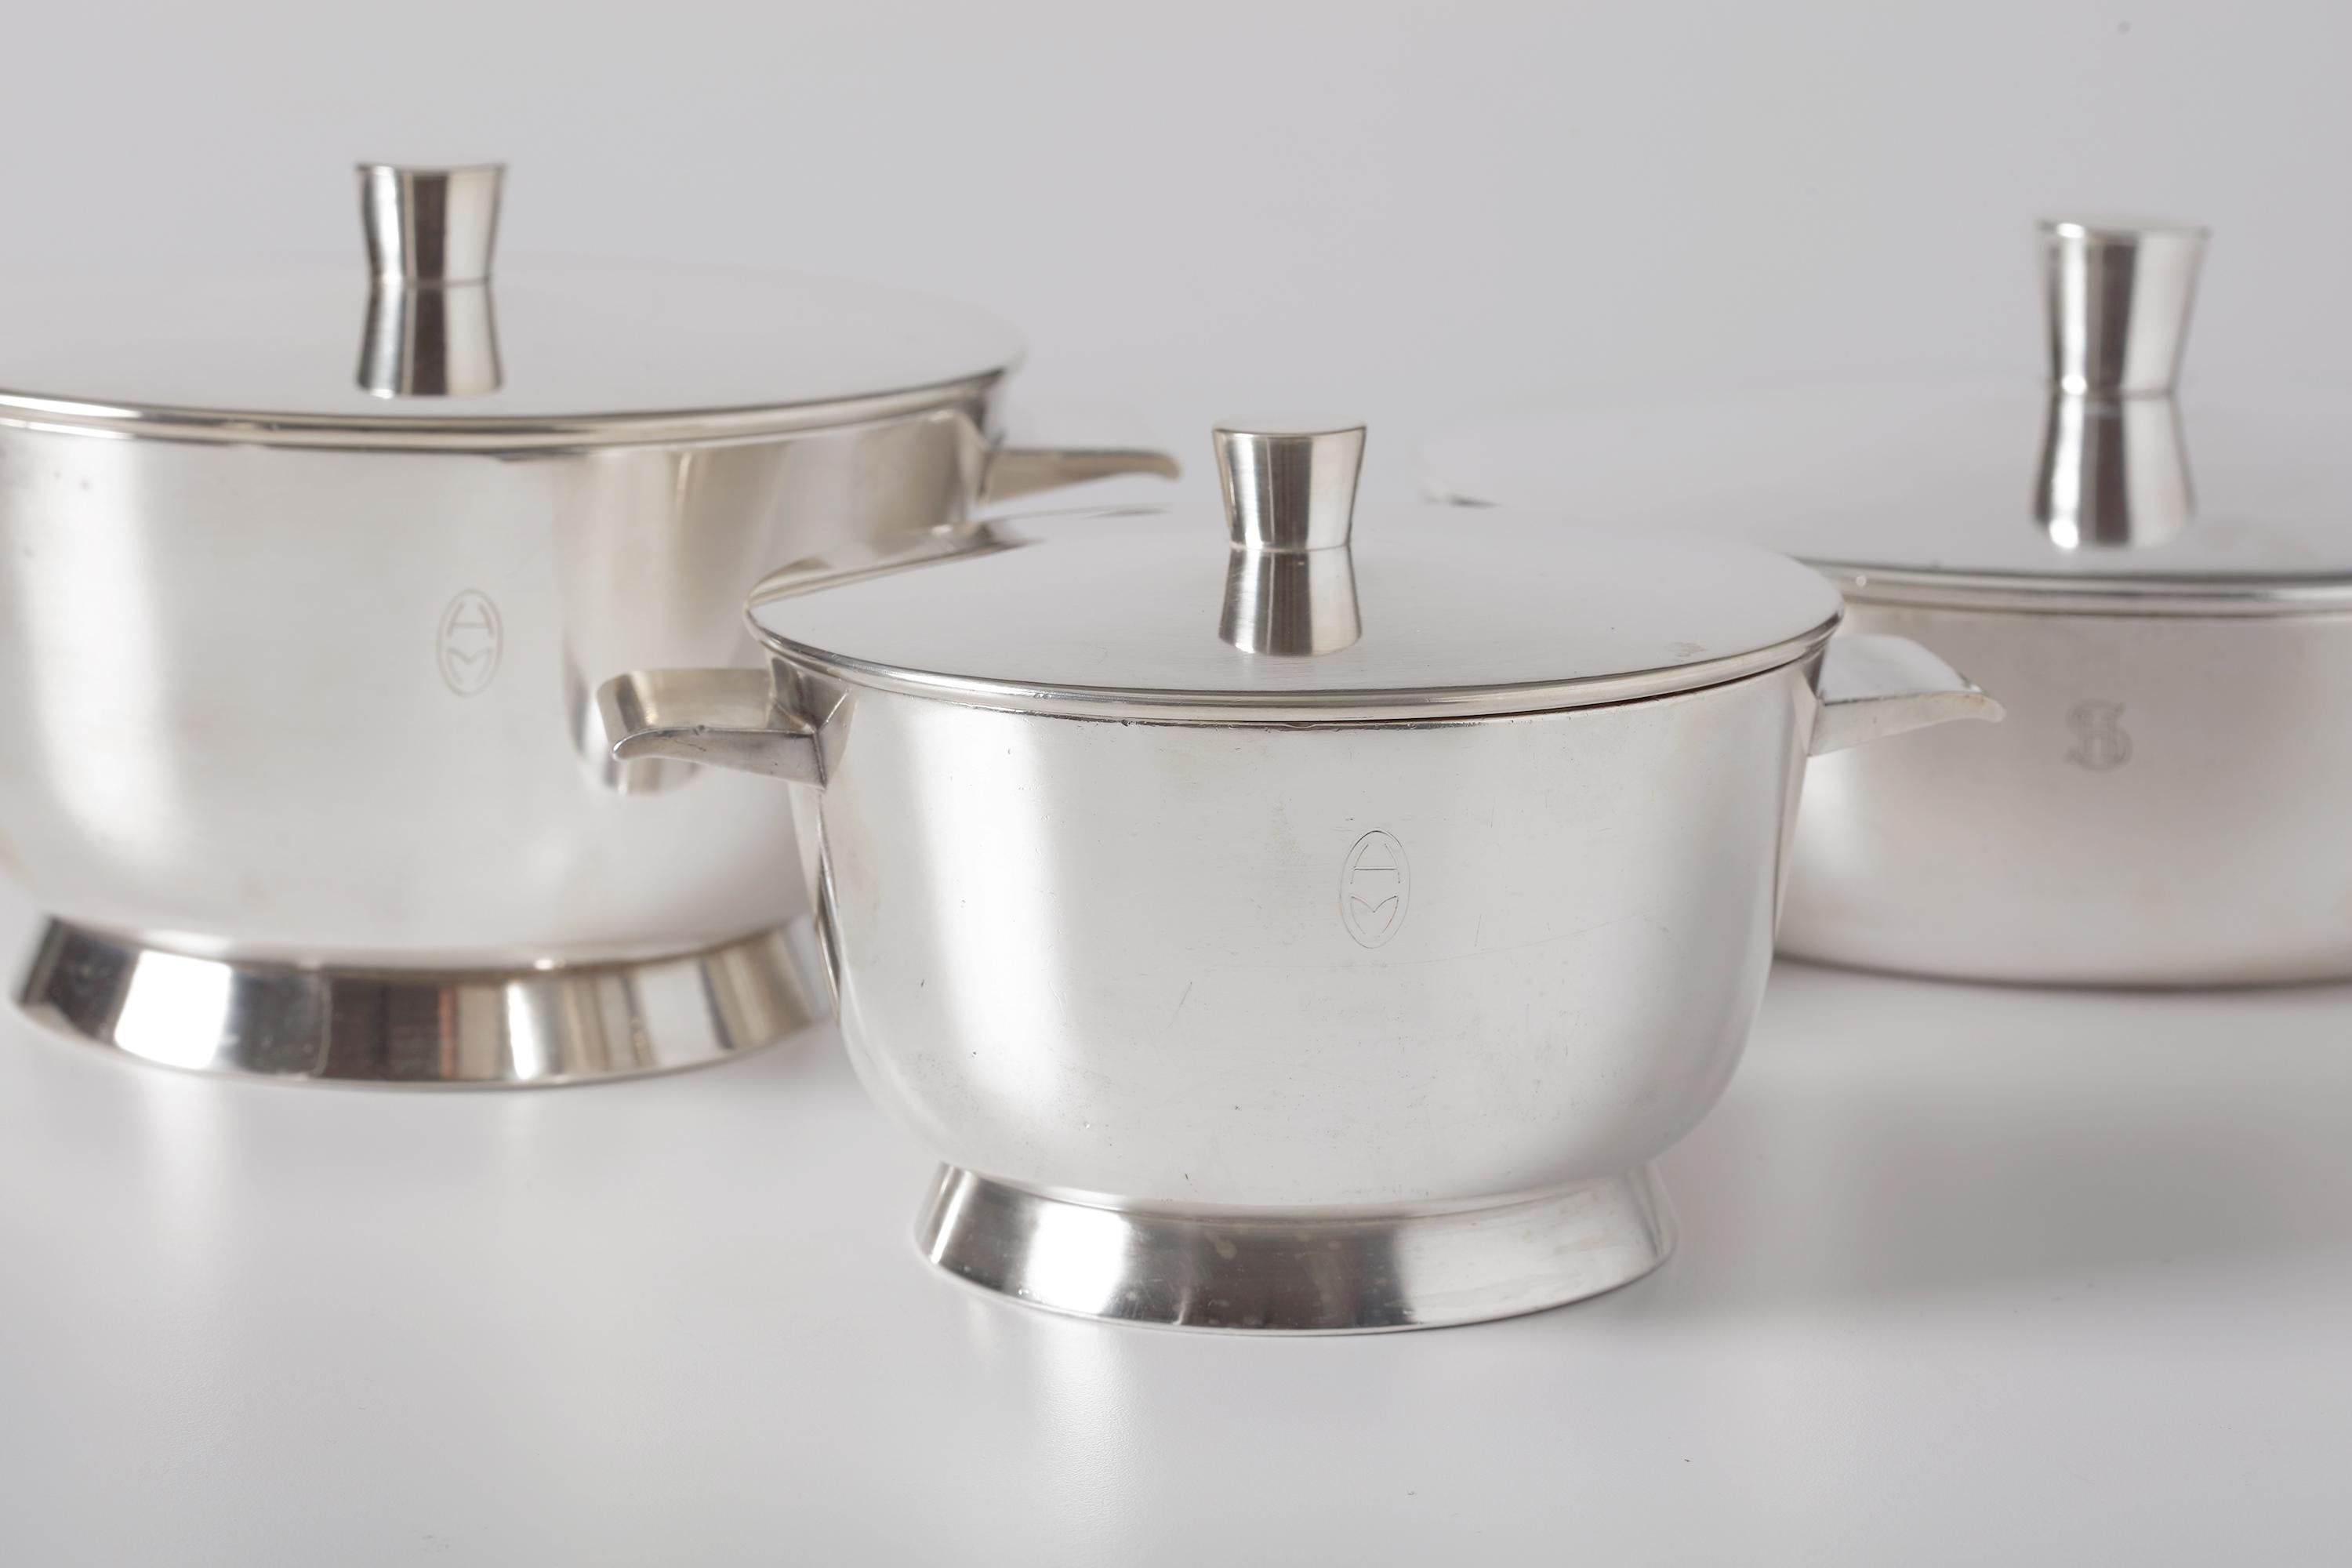 A rare, hard to come by set of 3 Gio Ponti silver plated deep / high 140CL. tureens for Arthur Krupp. These were designed for the VI Triennale in the 1930's. They are in great condition all marked Arthur Krupp, Milano, 140CL.

Dimensions: 

Large